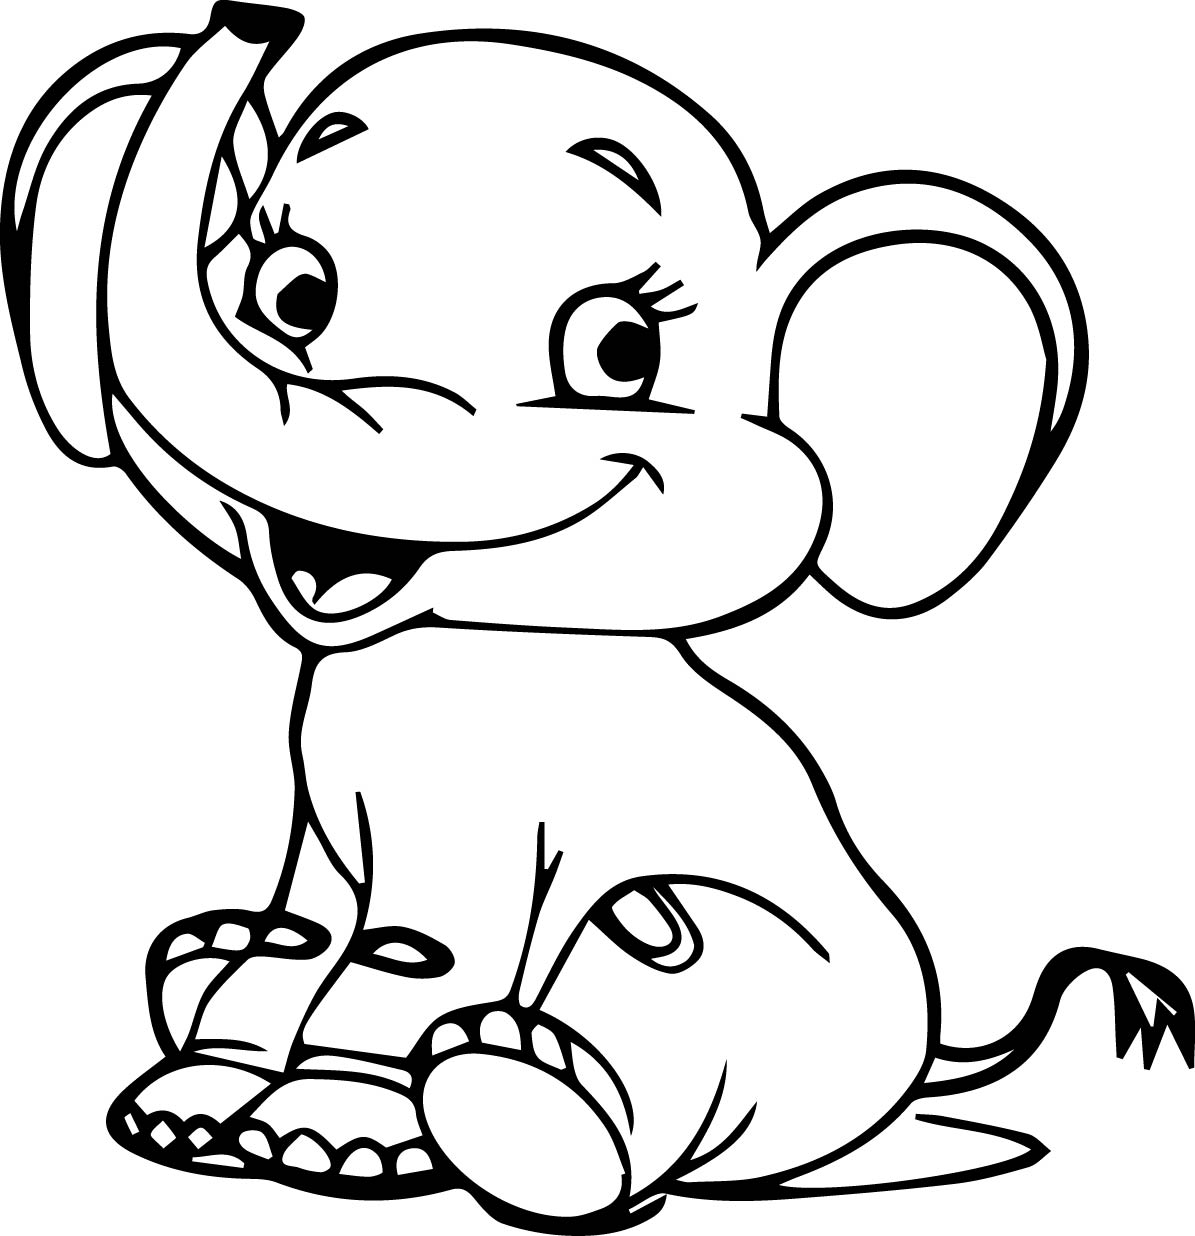 Elephant Face Coloring Pages at GetColorings.com | Free ...